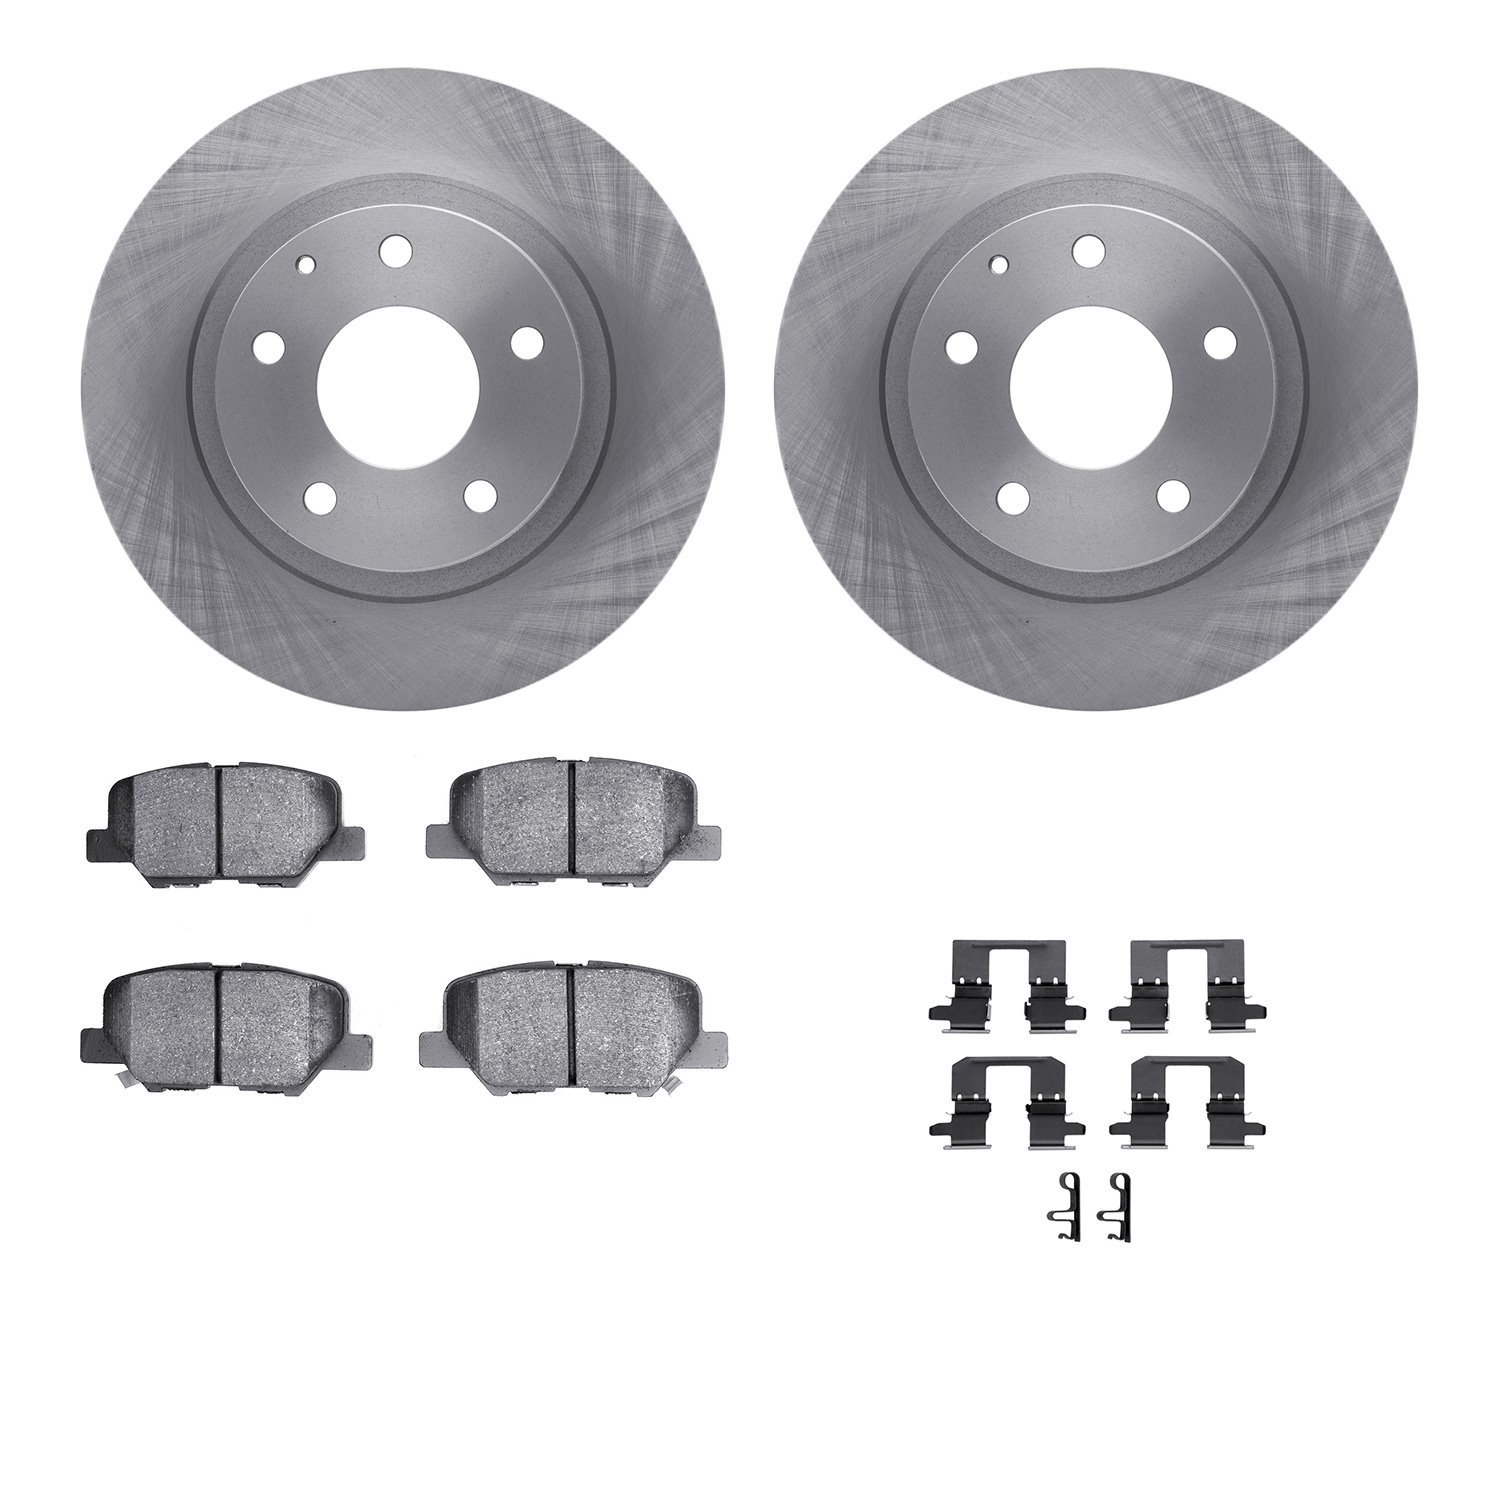 6312-80077 Brake Rotors with 3000-Series Ceramic Brake Pads Kit with Hardware, 2014-2015 Ford/Lincoln/Mercury/Mazda, Position: R